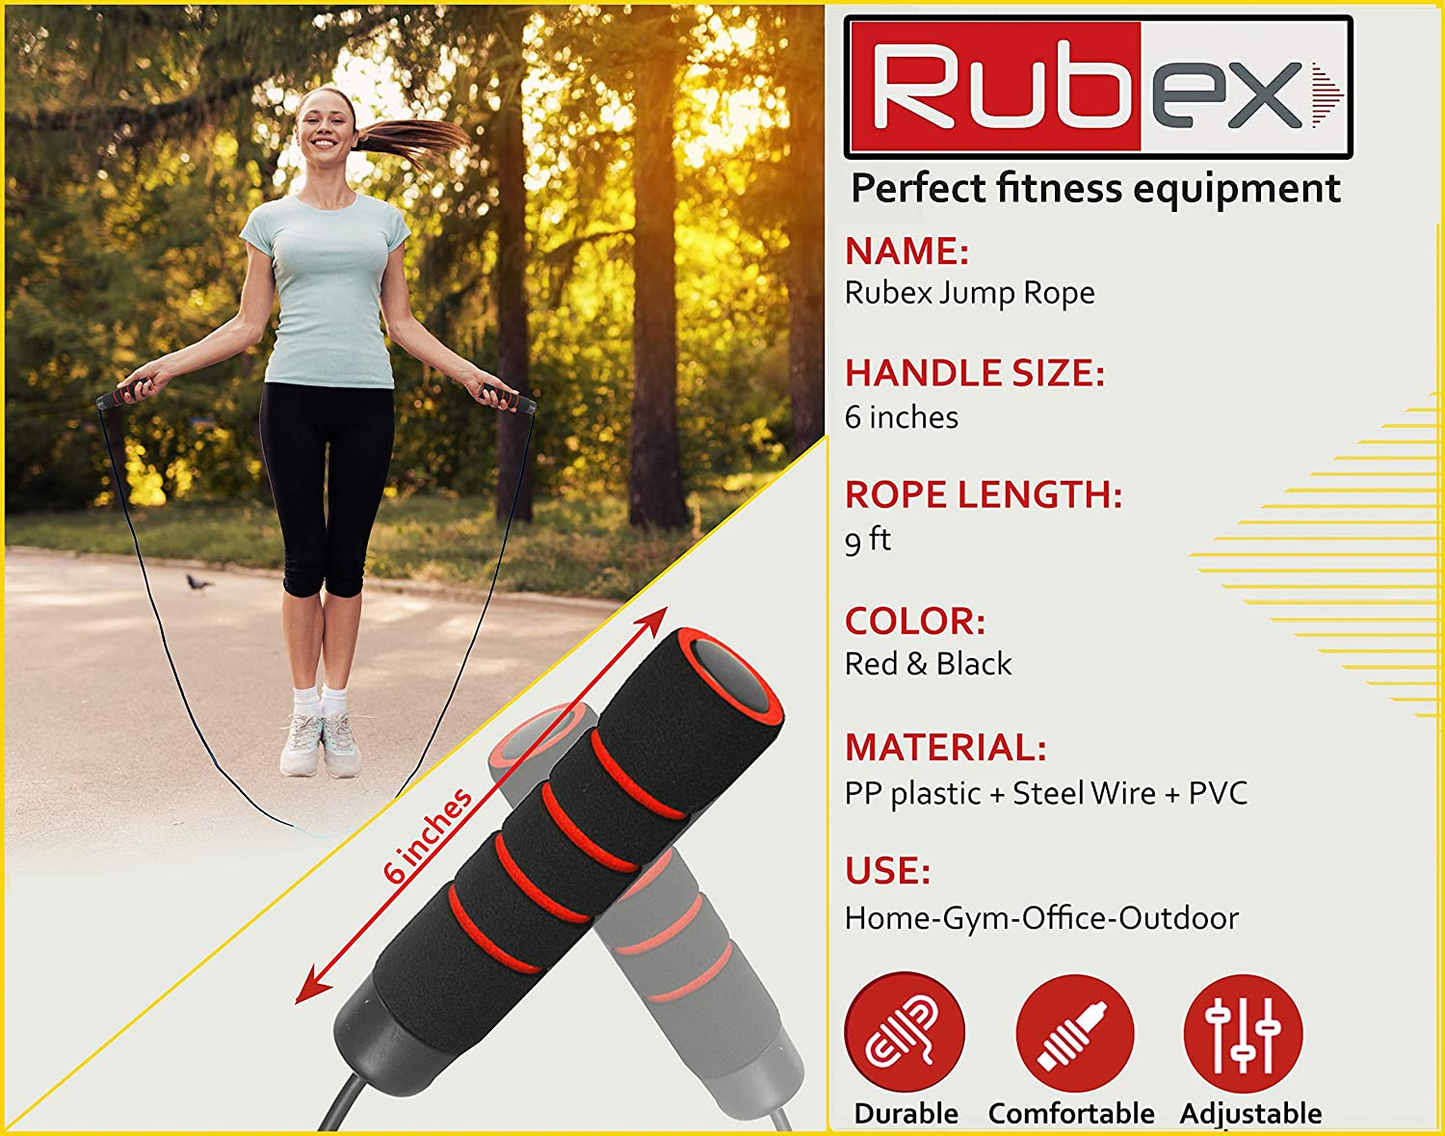 RUBEX Weighted Jump Rope (0.5 LB) with Non-Slip Memory Foam Handles - for Crossfit, Boxing, Strength and Endurance, Exercise Fitness, Adjustable Skipping Rope for Men, Kids, Women - Solid PVC